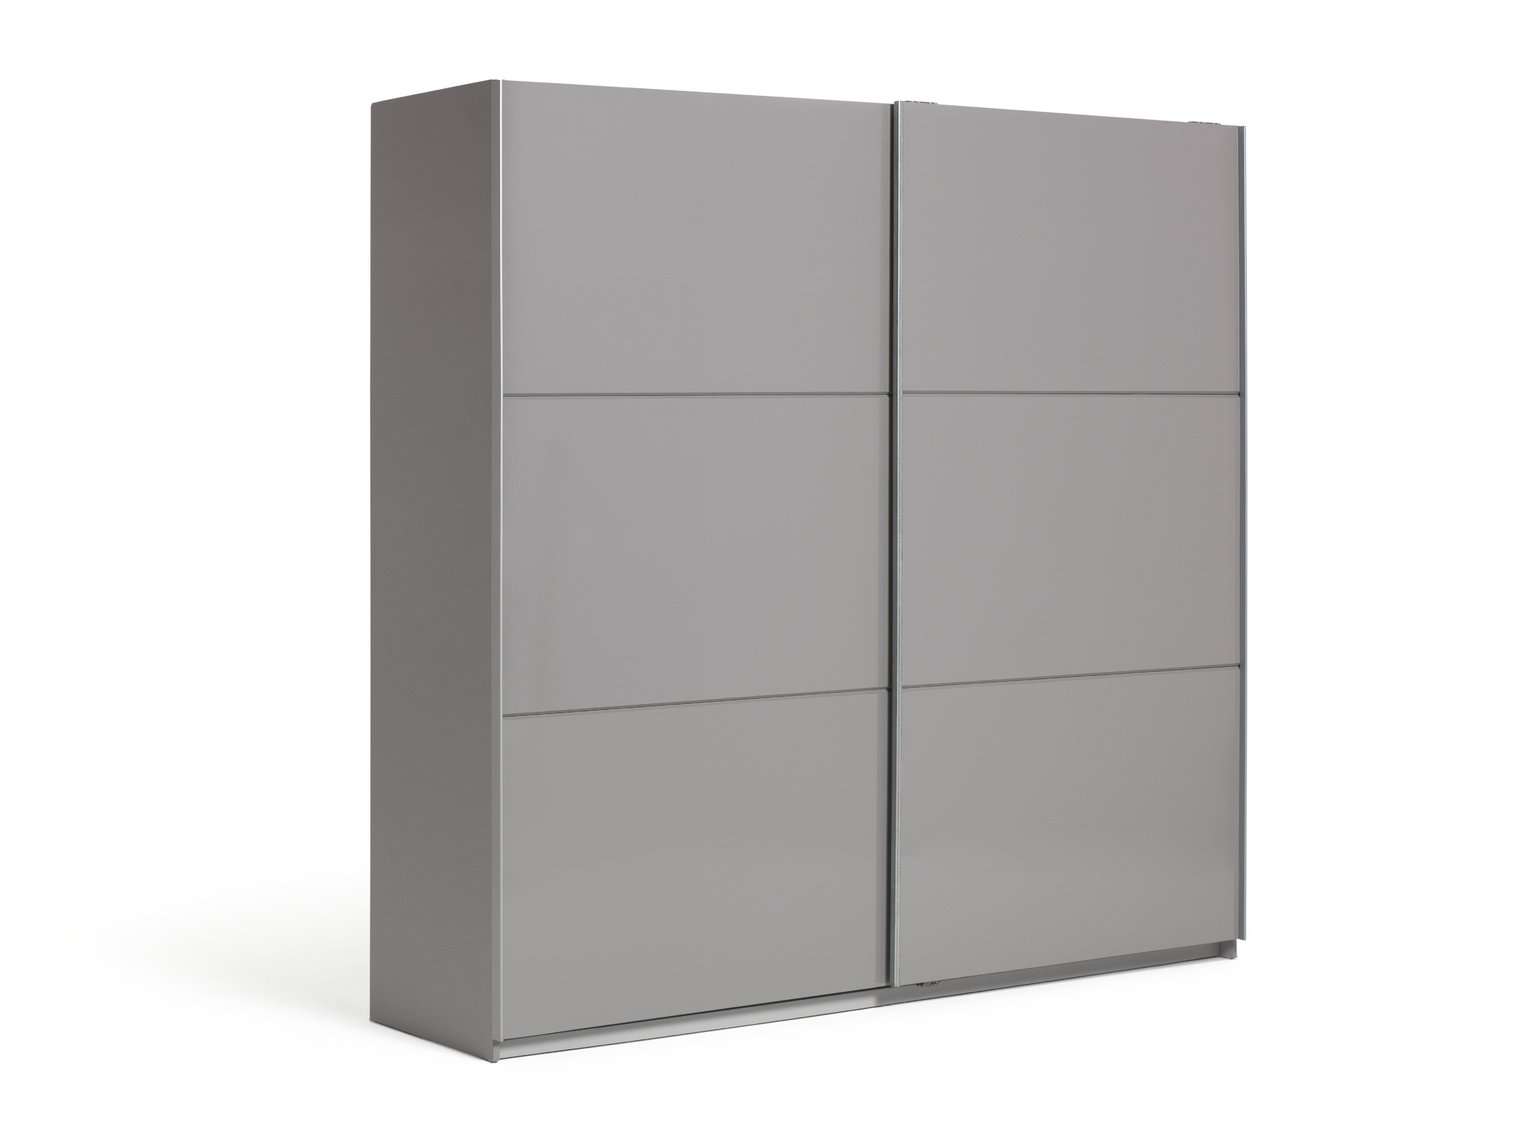 Argos Home Holsted Grey Gloss Extra Large Sliding Wardrobe Review